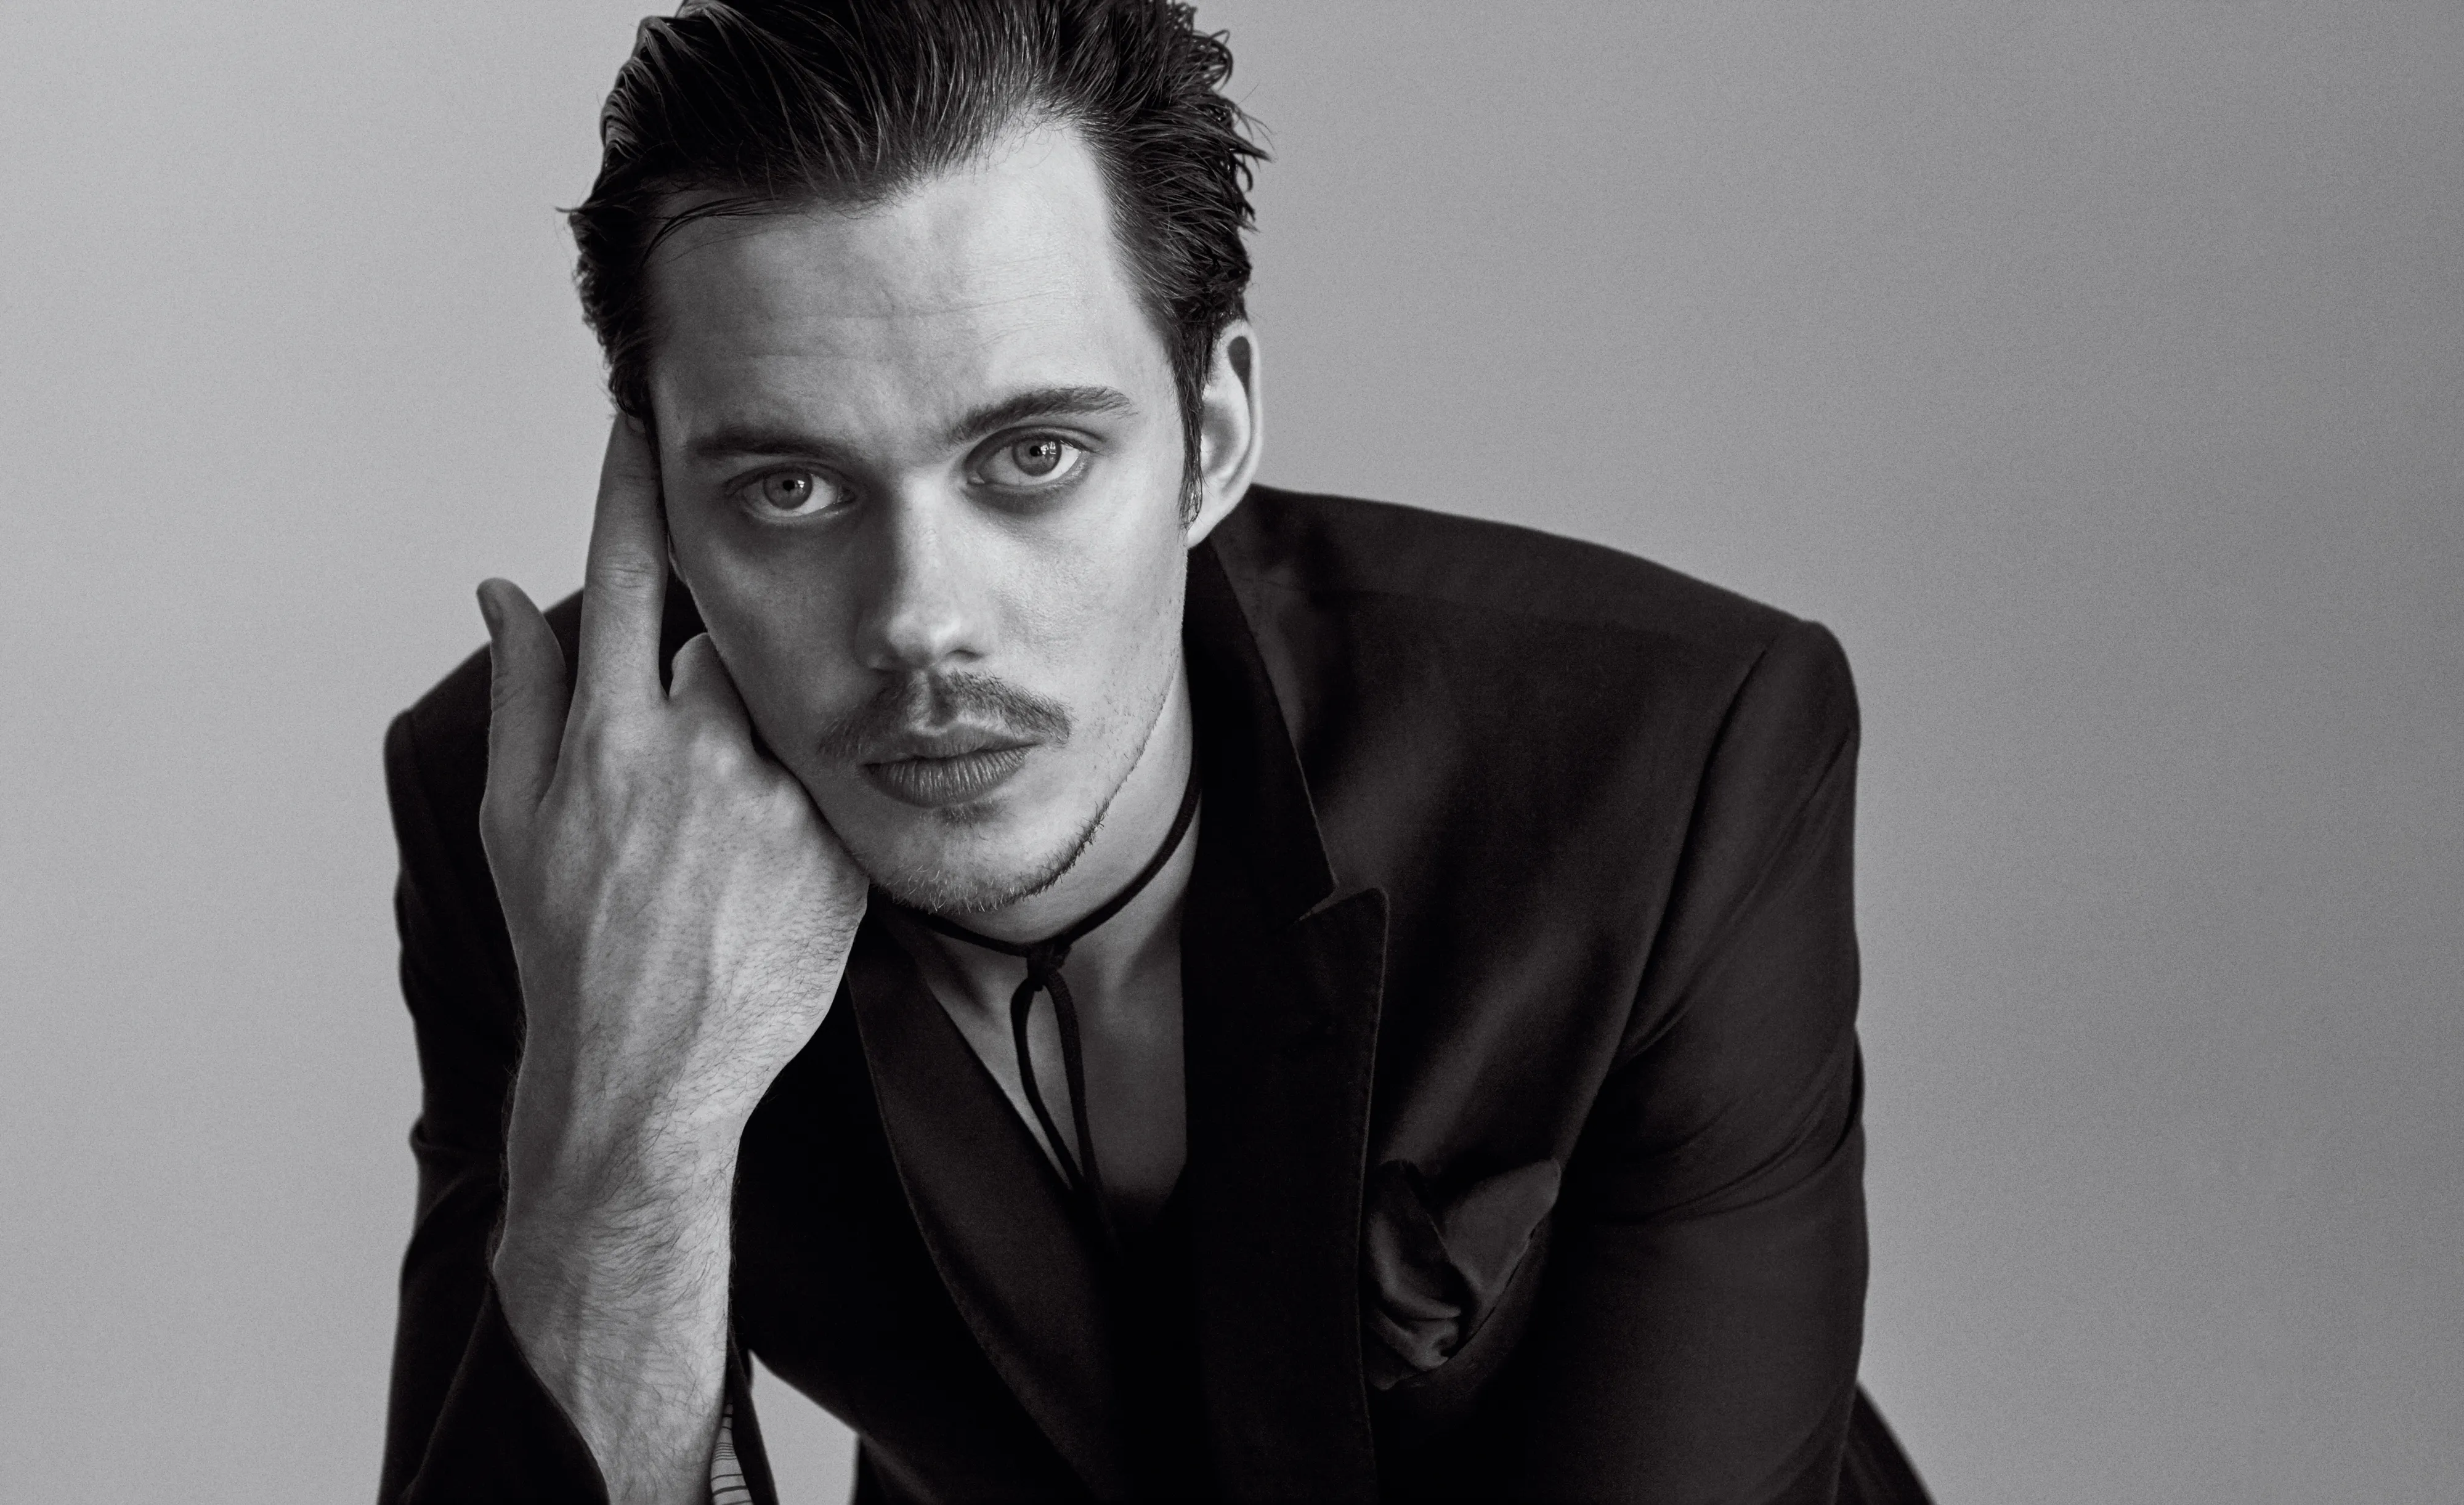 Bill Skarsgard Cast in Lead Role for The Crow Reboot